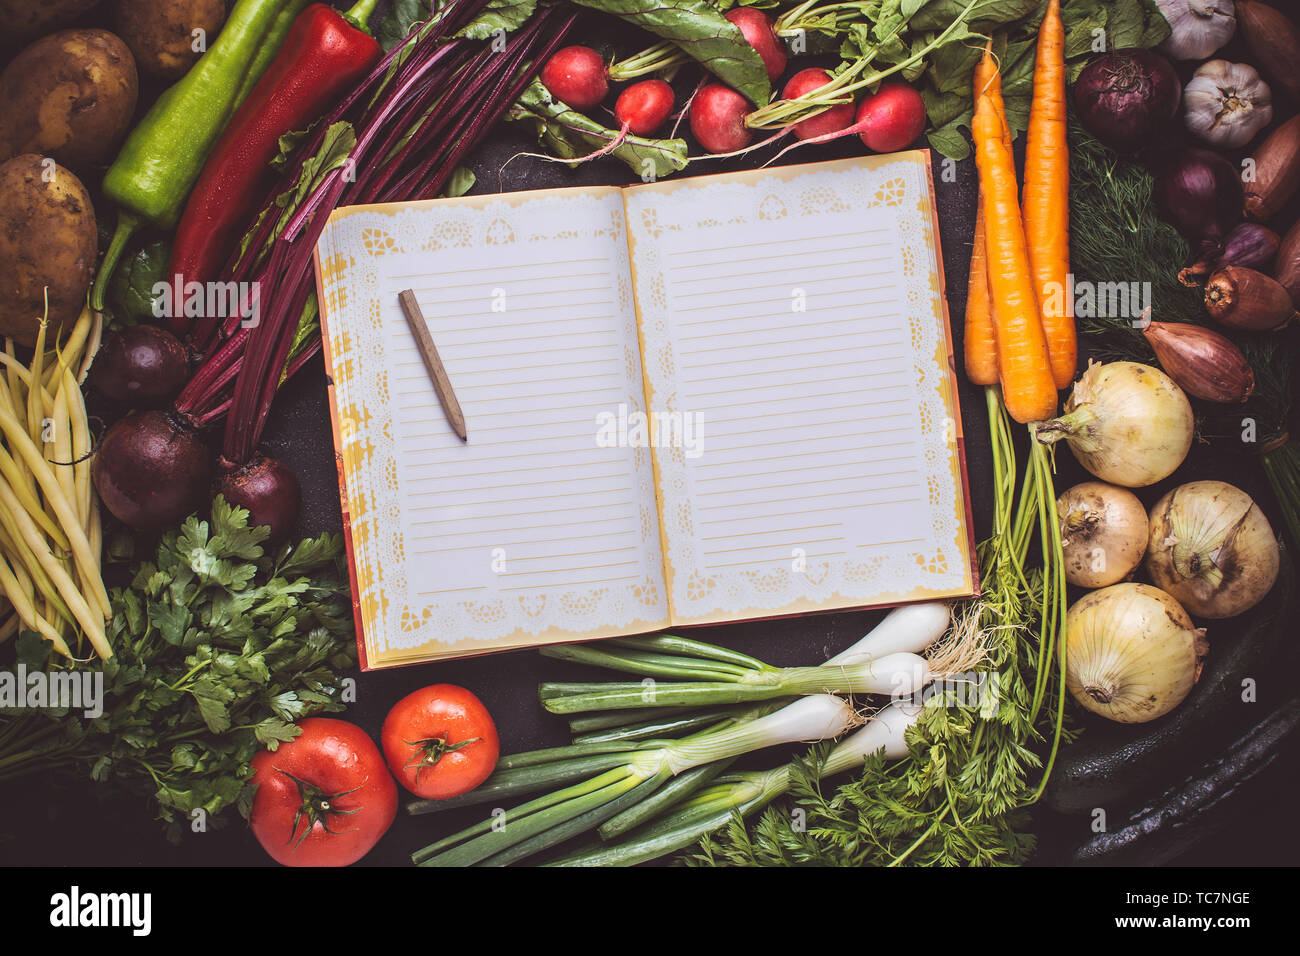 Vegetarian Raw Food Recipe. Blank Empty Cook Book Mockup with Fresh Vegetables. Healthy Eating Concept with Copy Space. Stock Photo